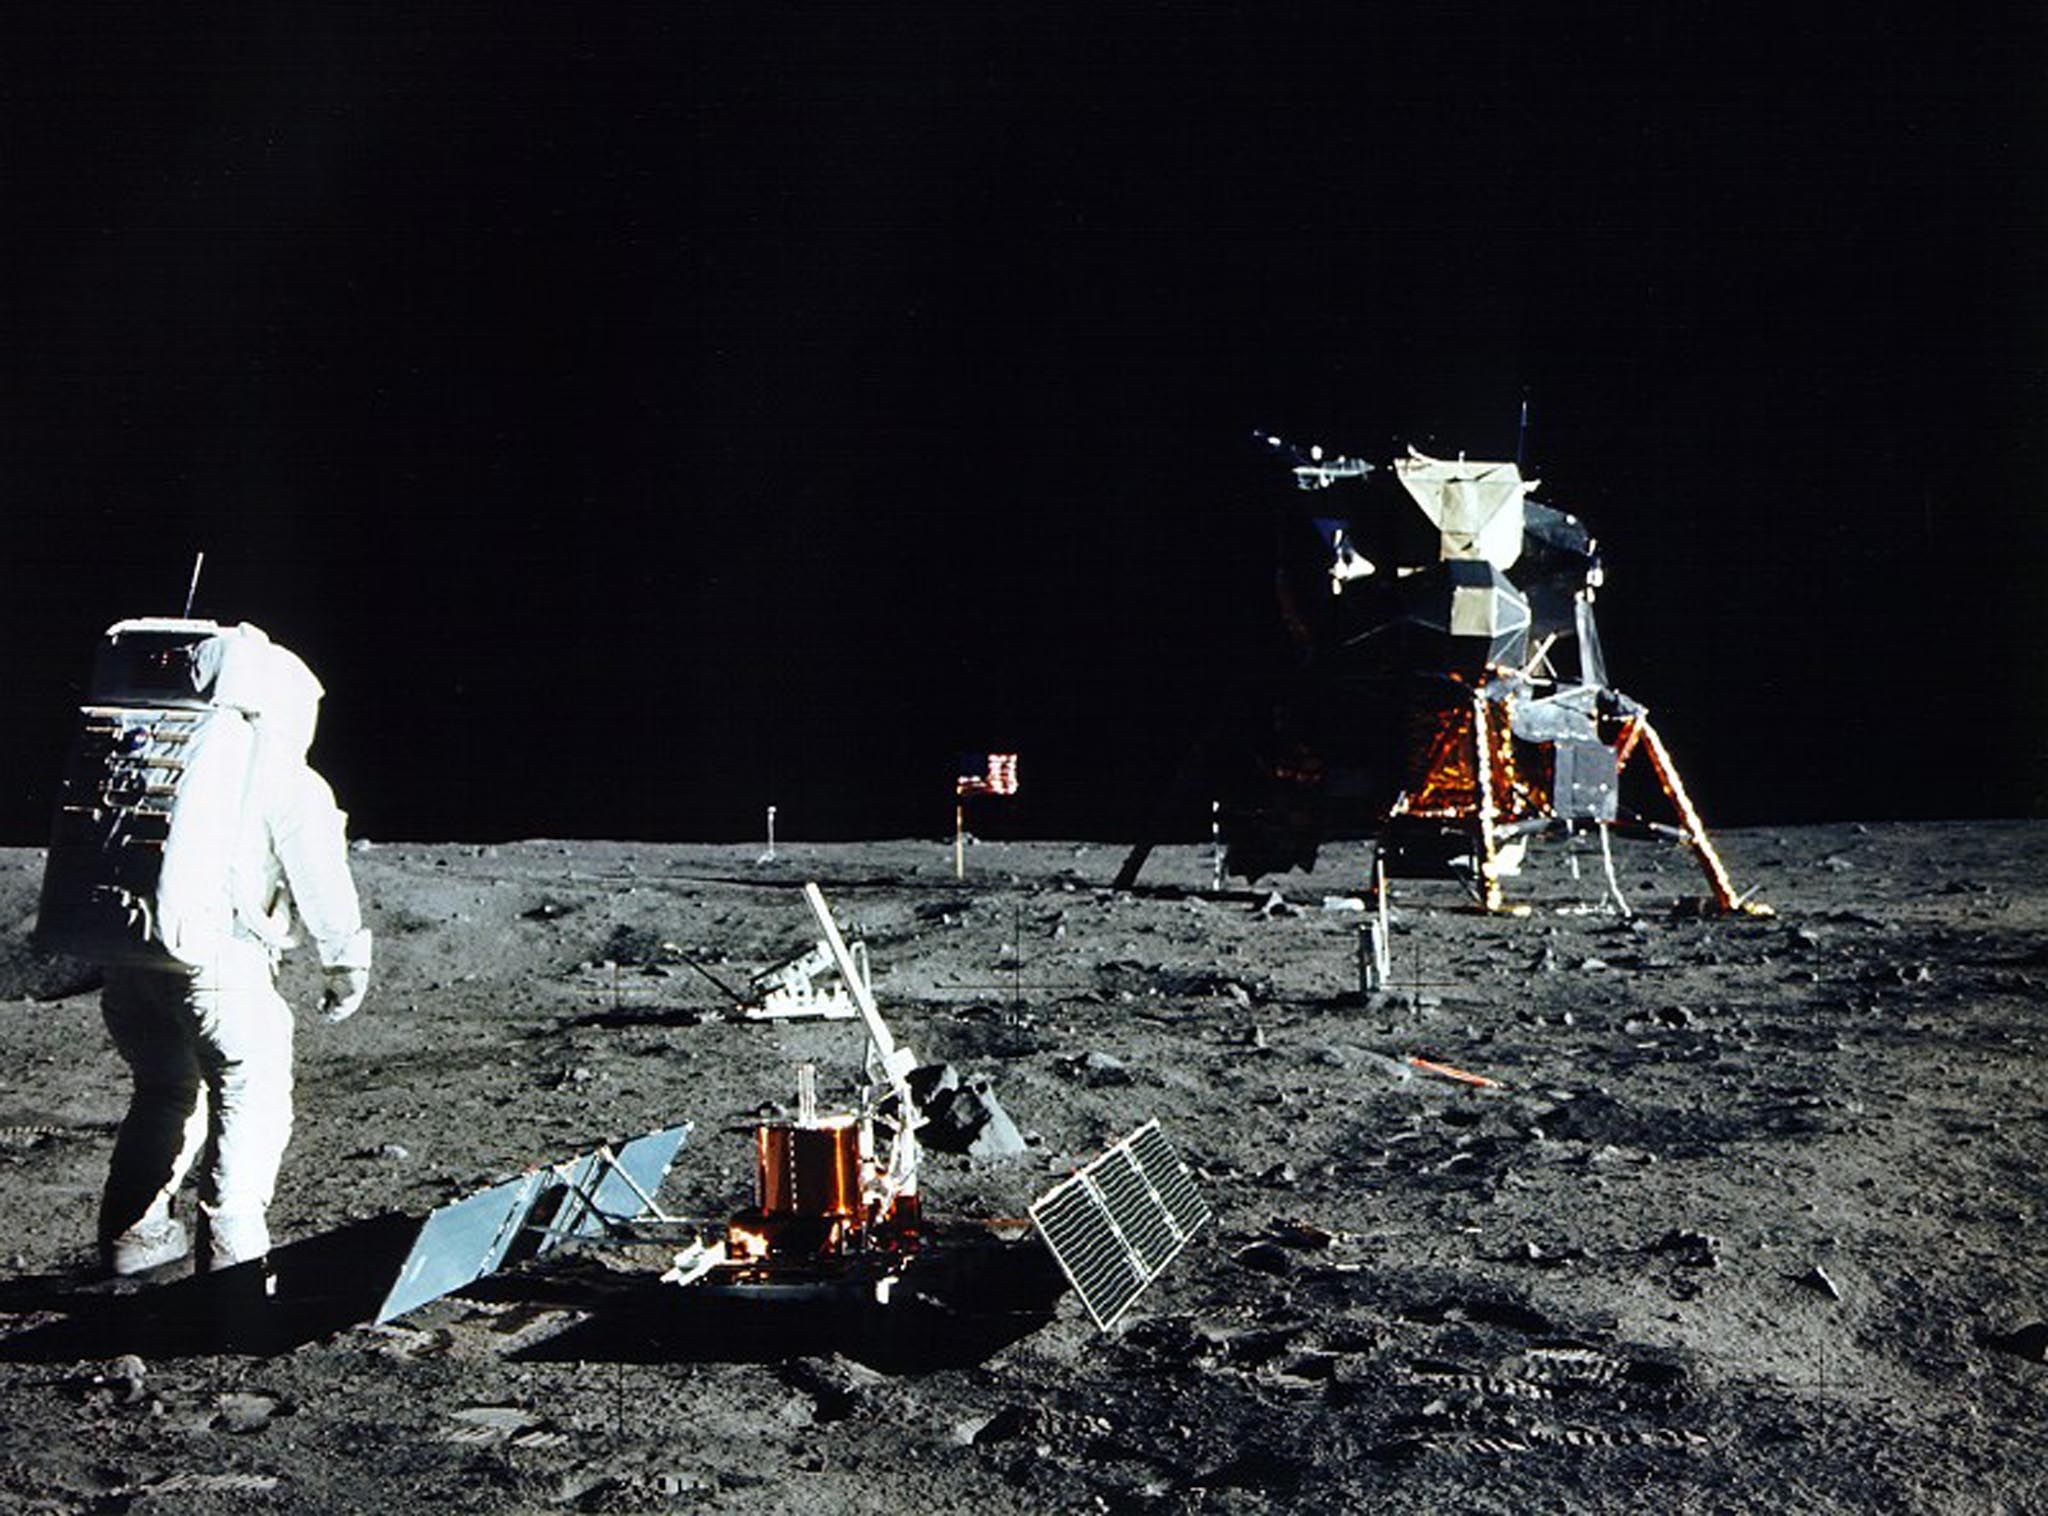 Photo claims to show proof of "fake" Apollo moon landing.